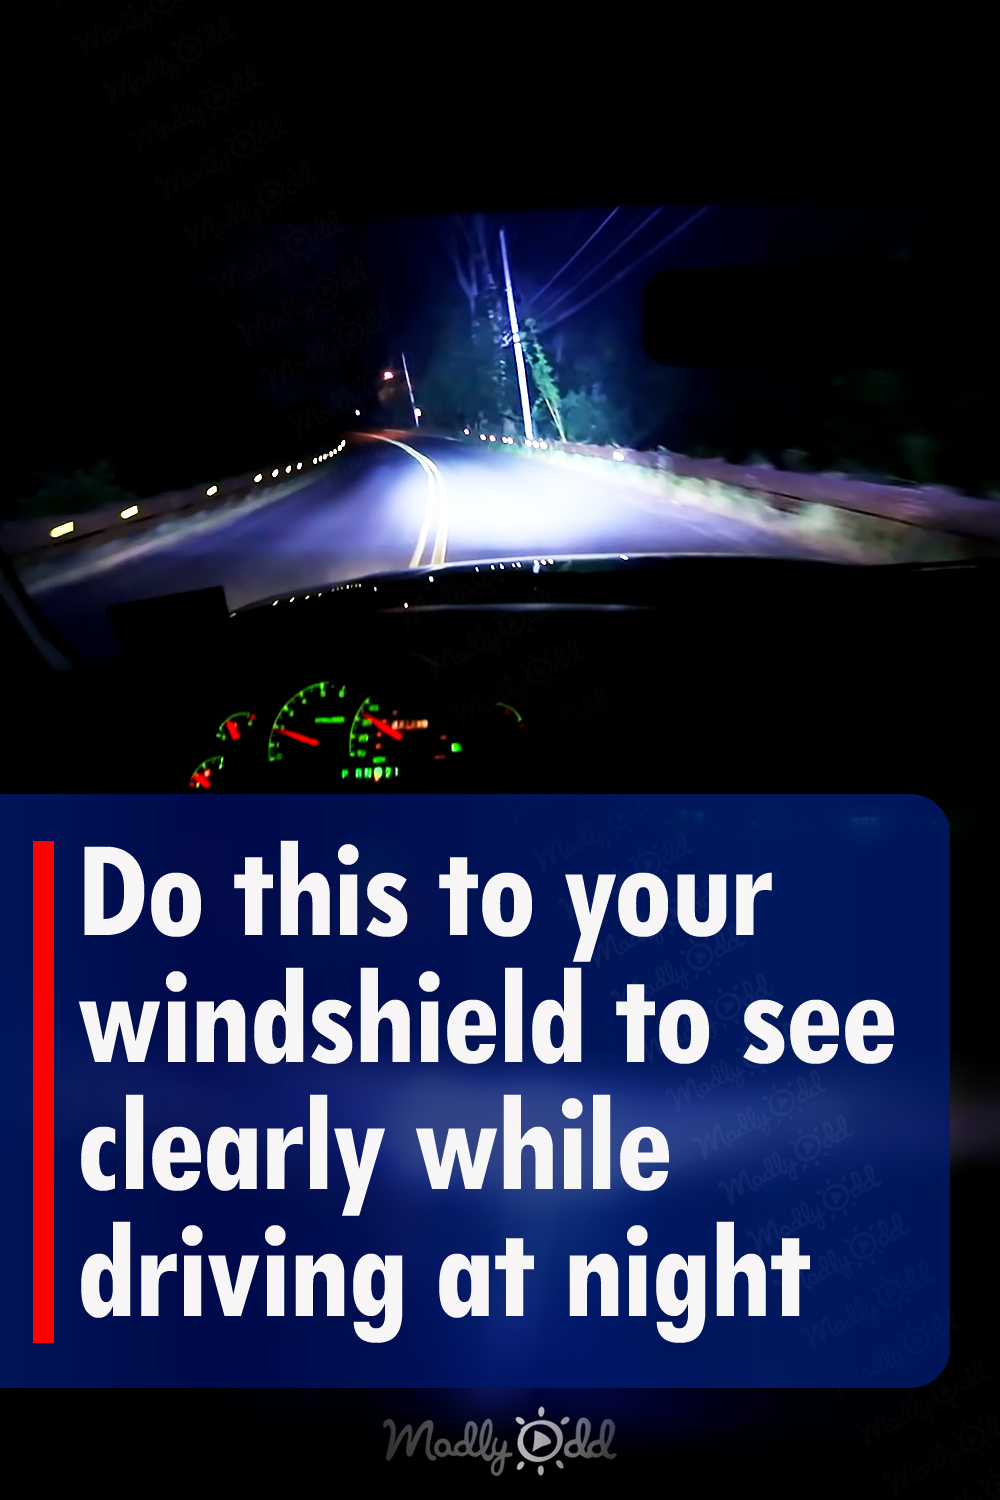 Do this to your windshield to see clearly while driving at night